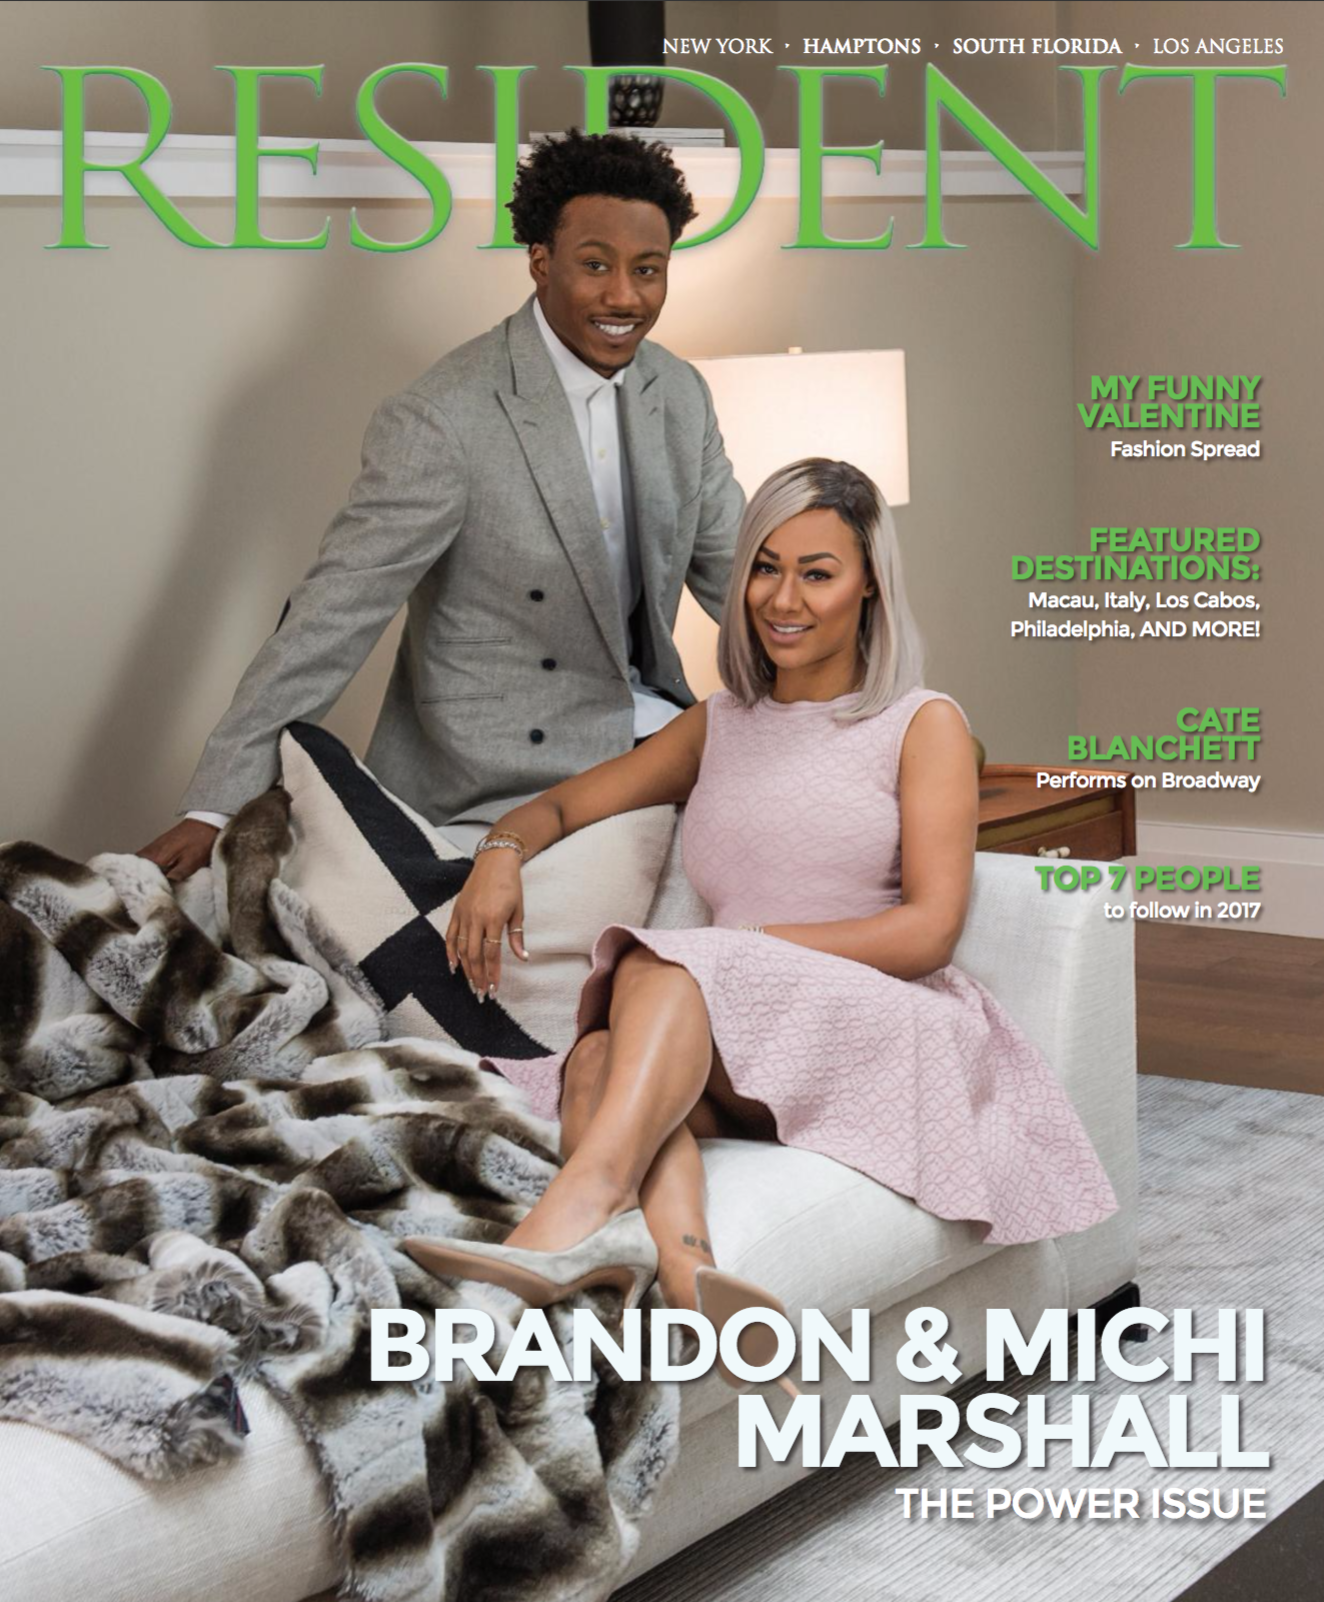 Brandon & Michi Marshall by photographer Andrew Werner for Resident Magazine - Cover - Feb 2017.png